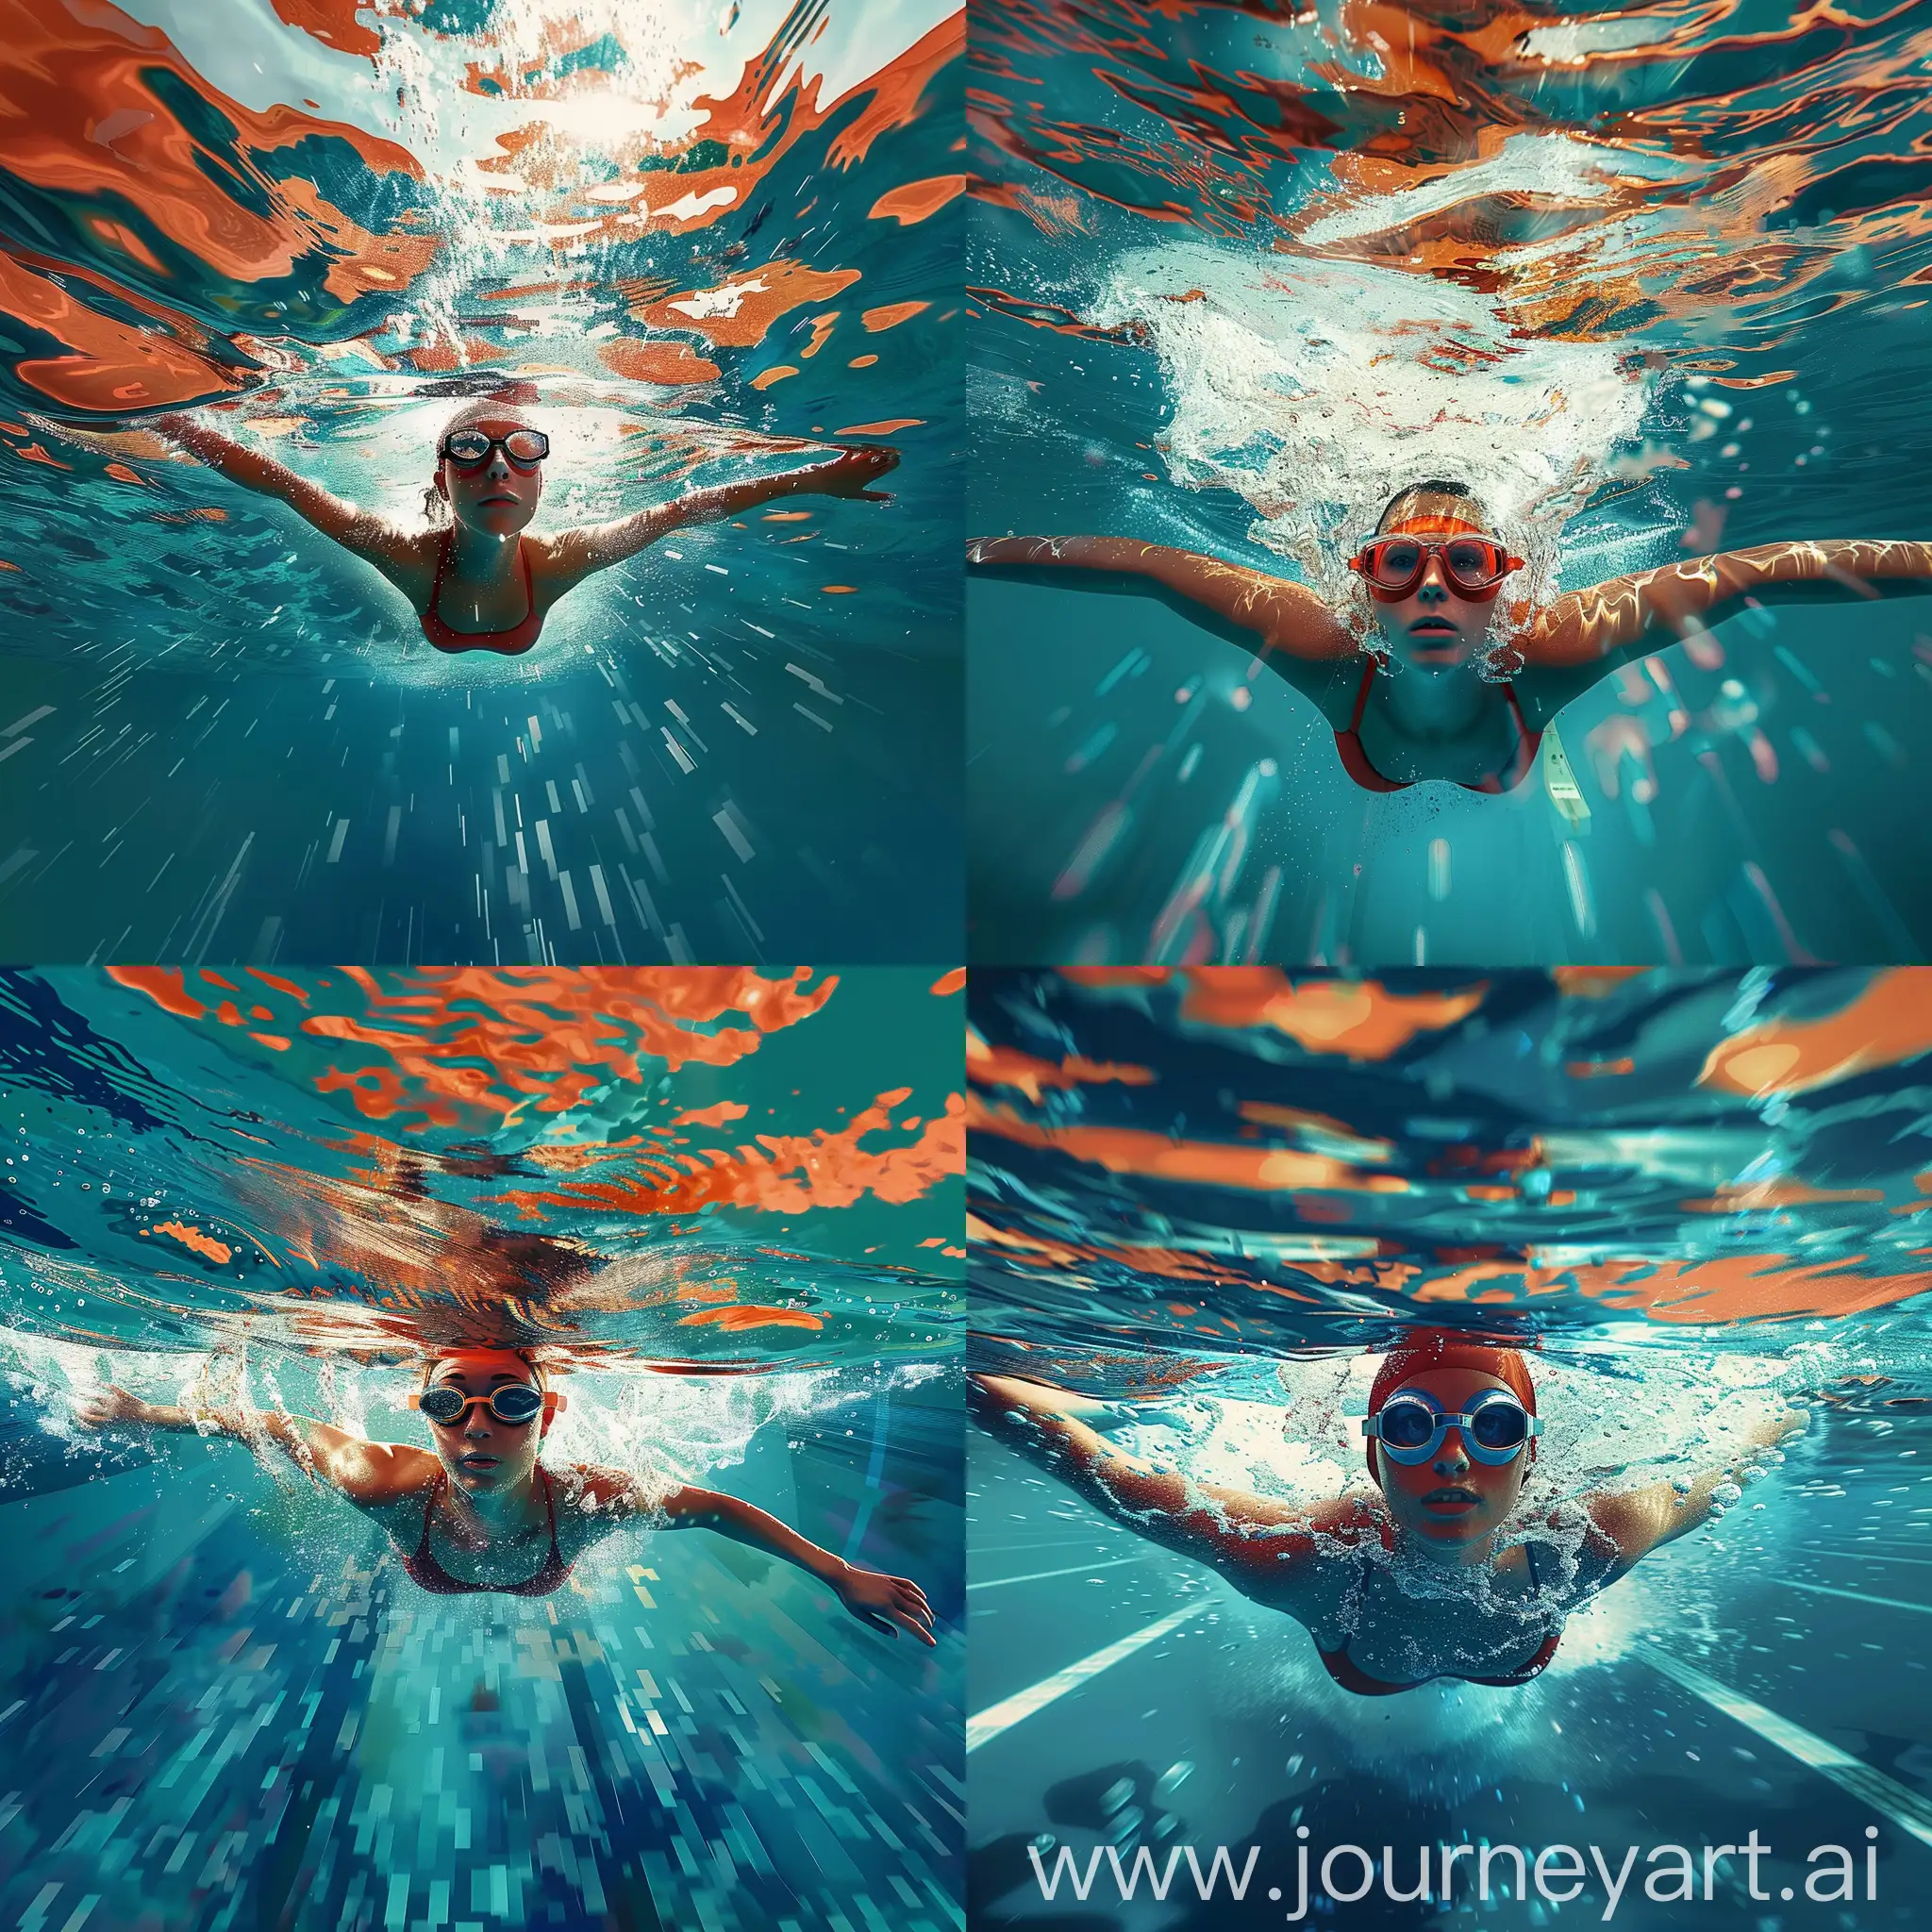 Young-Female-Swimmer-Racing-Underwater-with-Splashes-in-Digital-Art